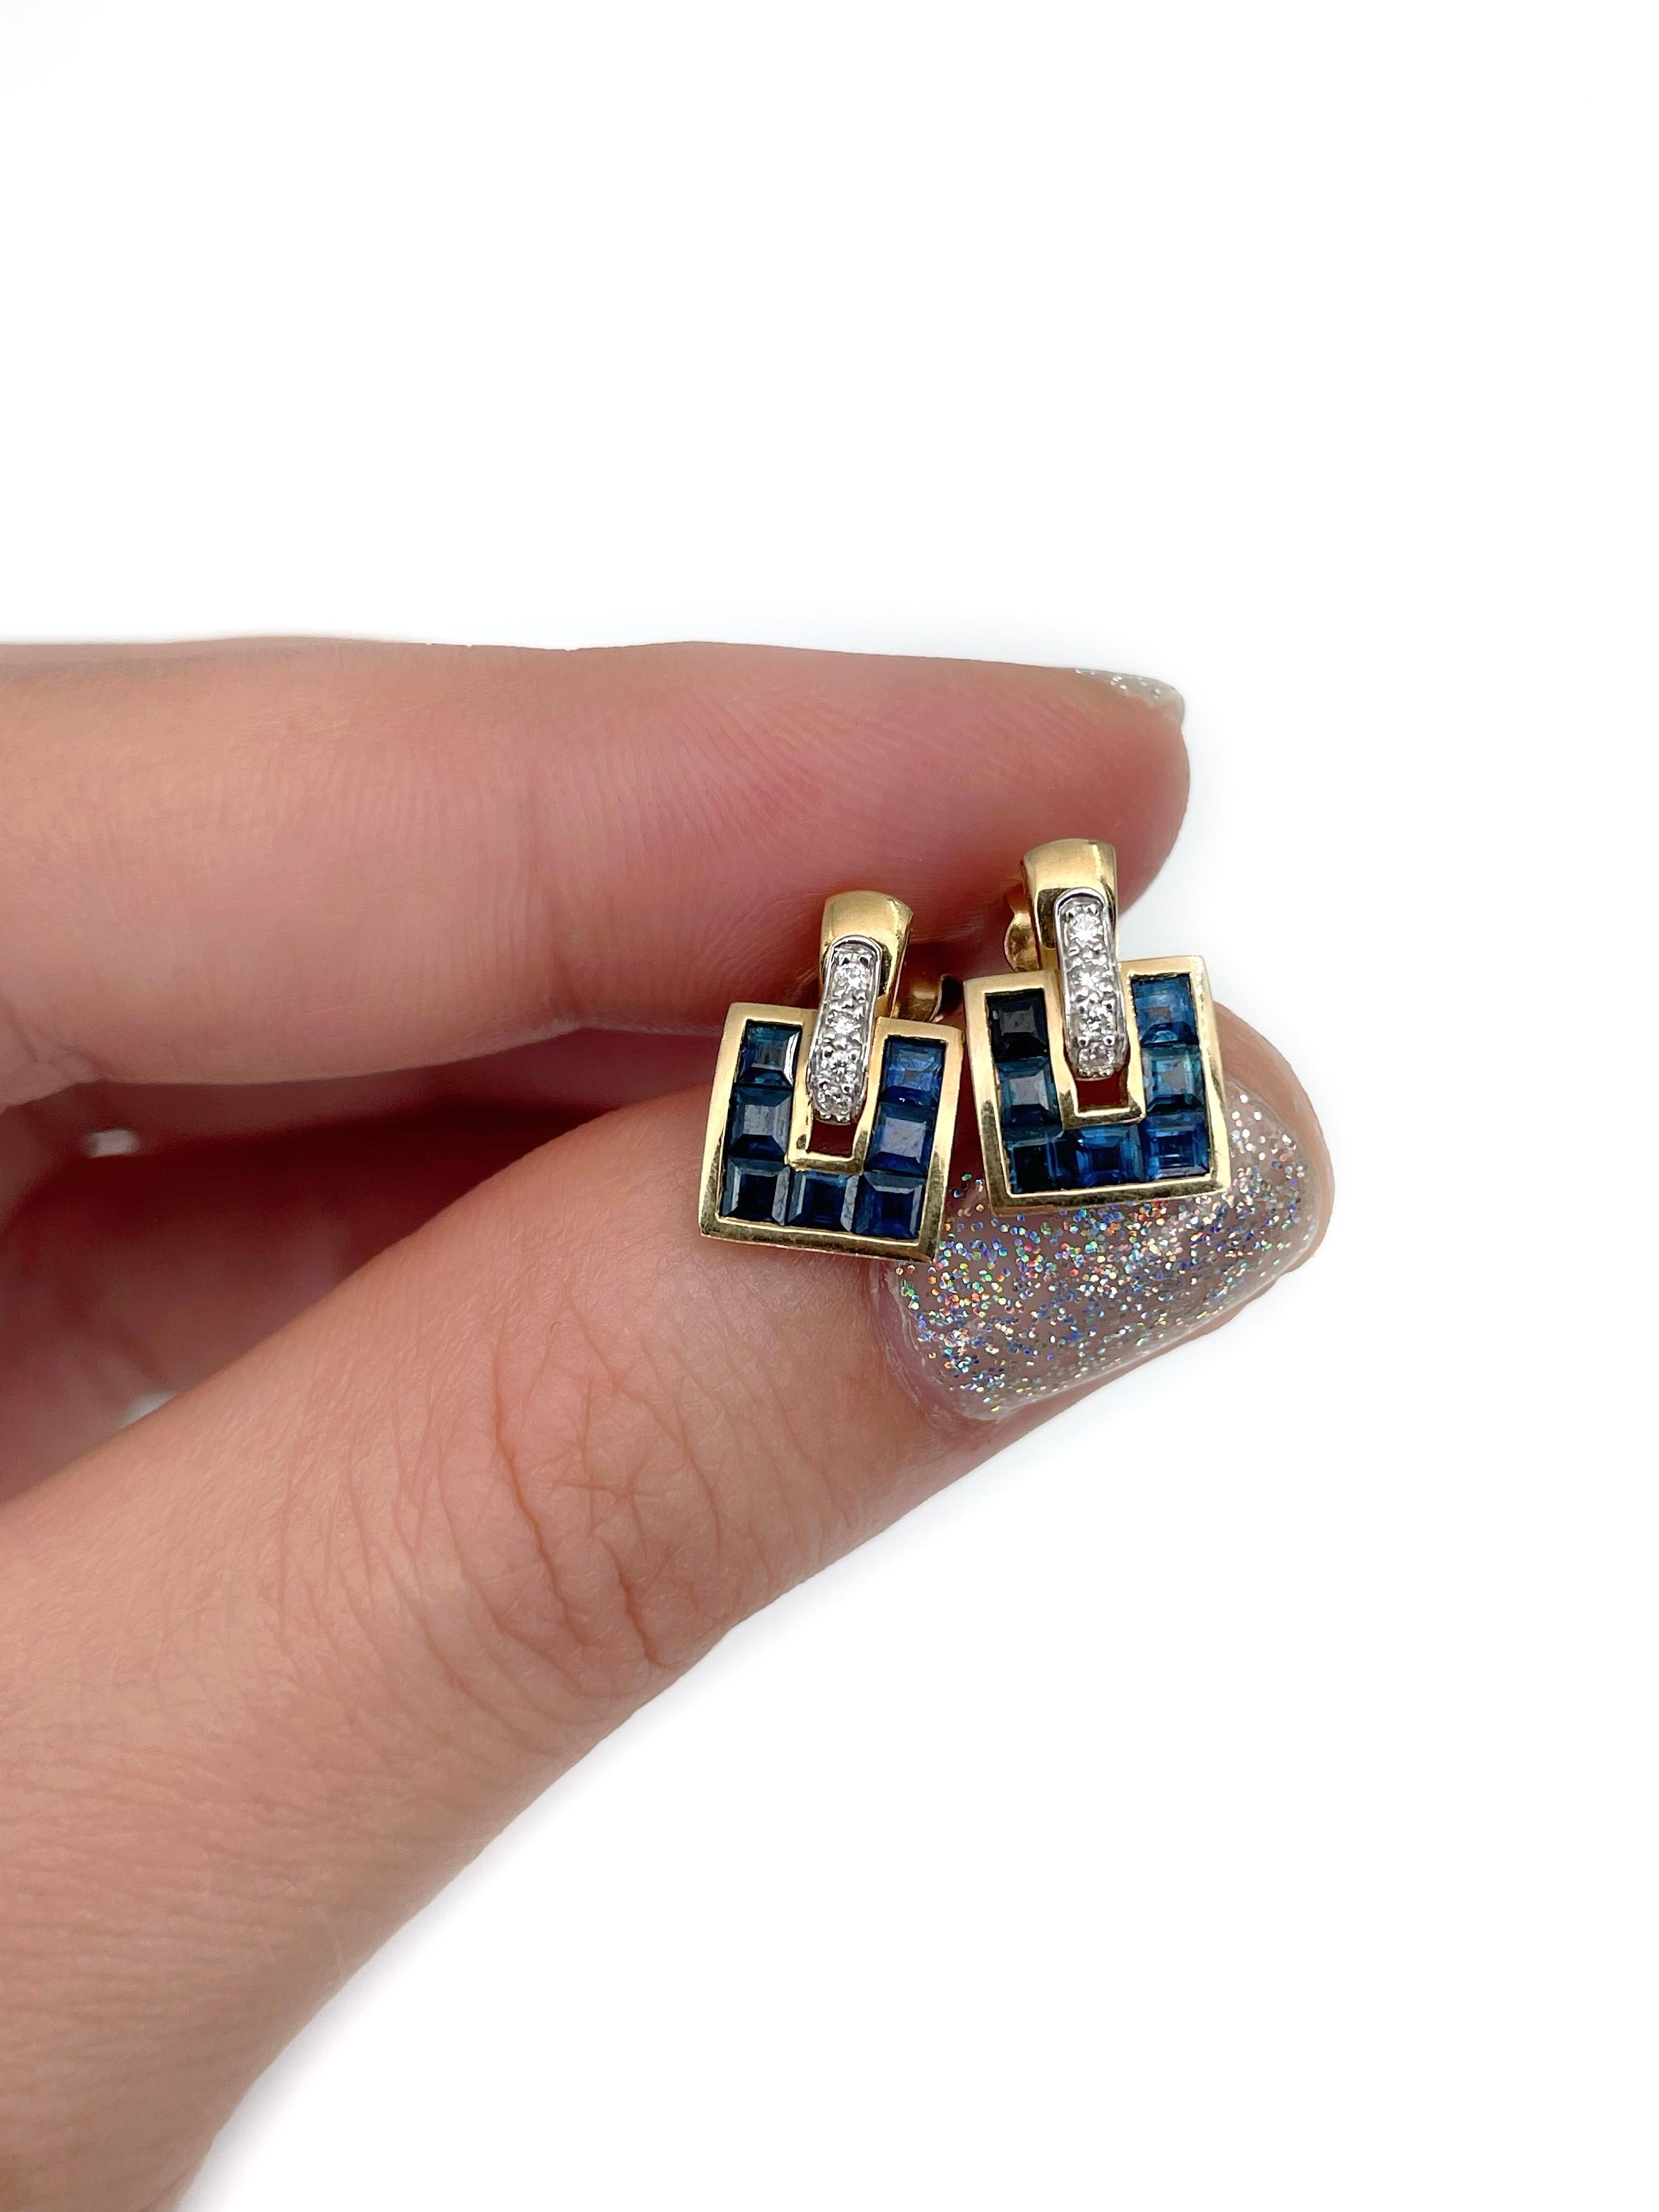 This is a pair of rectangle stud earrings designed by Guy Laroche in 2000s. It is crafted in 18K yellow gold. The piece features baguette cut blue sapphires and round brilliant cut diamonds.

Signed: “Guy Laroche. 750”

Weight: 3.54g
Size: